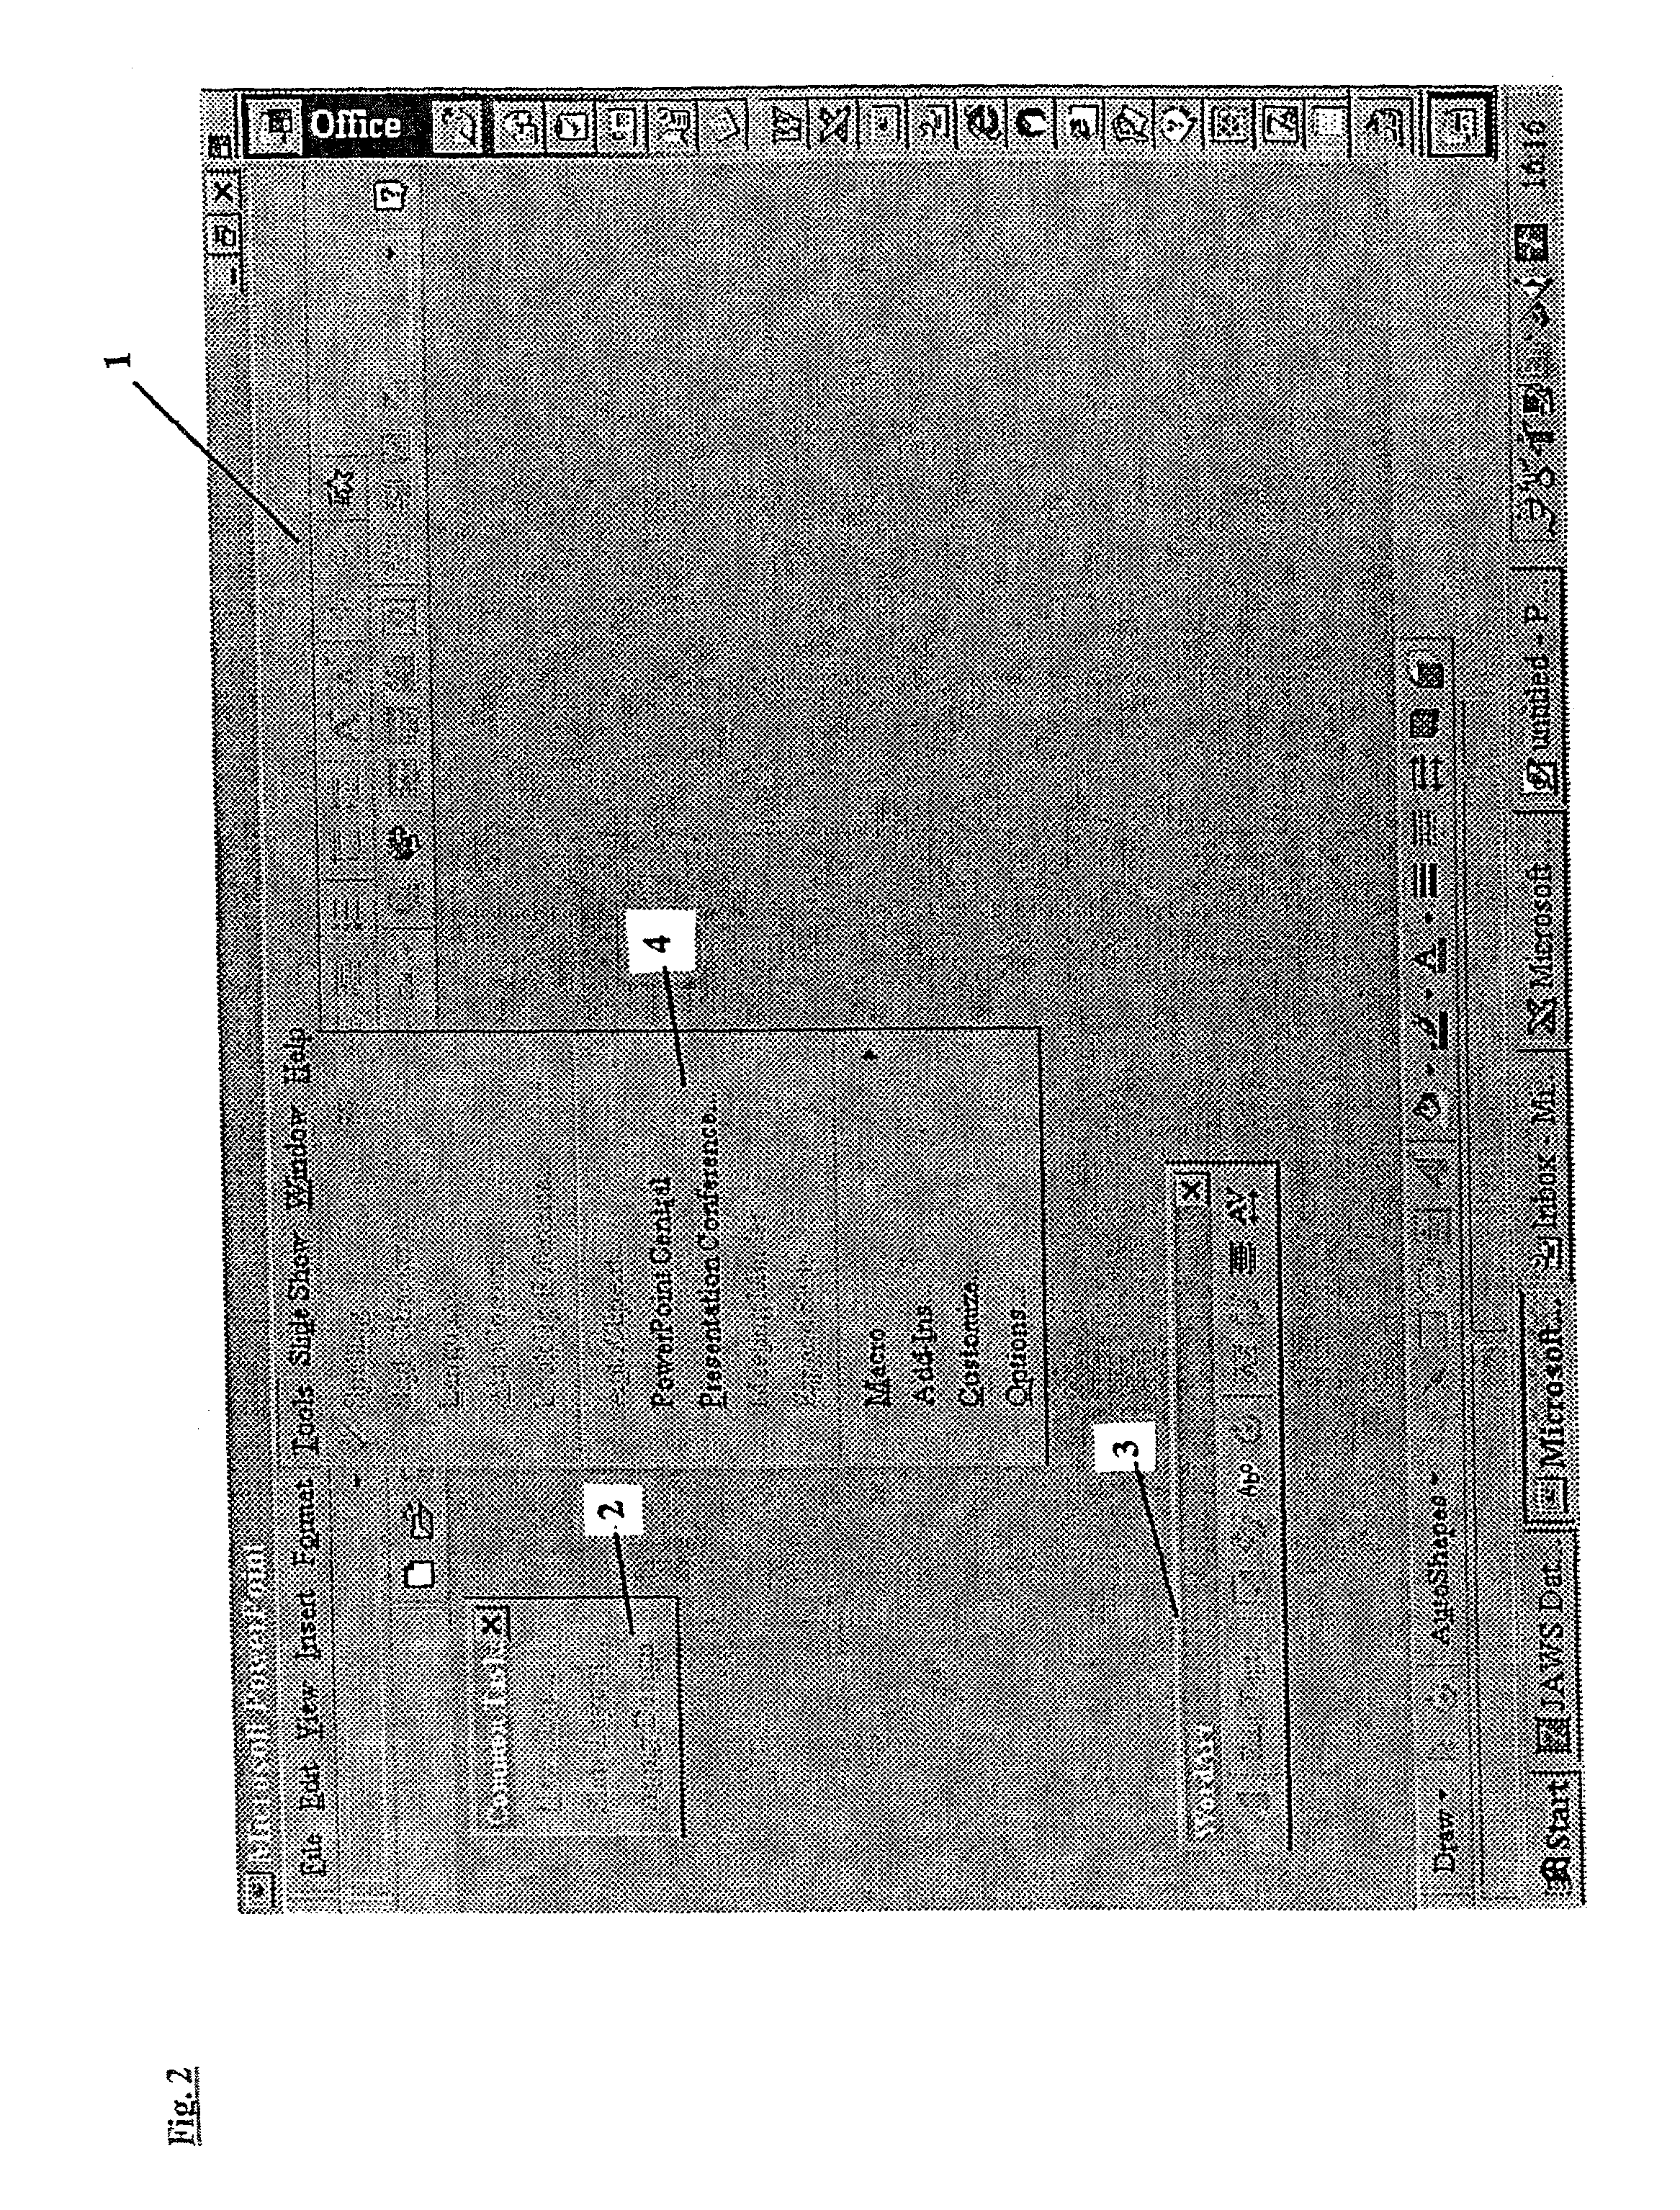 Display method for multiple layered screens